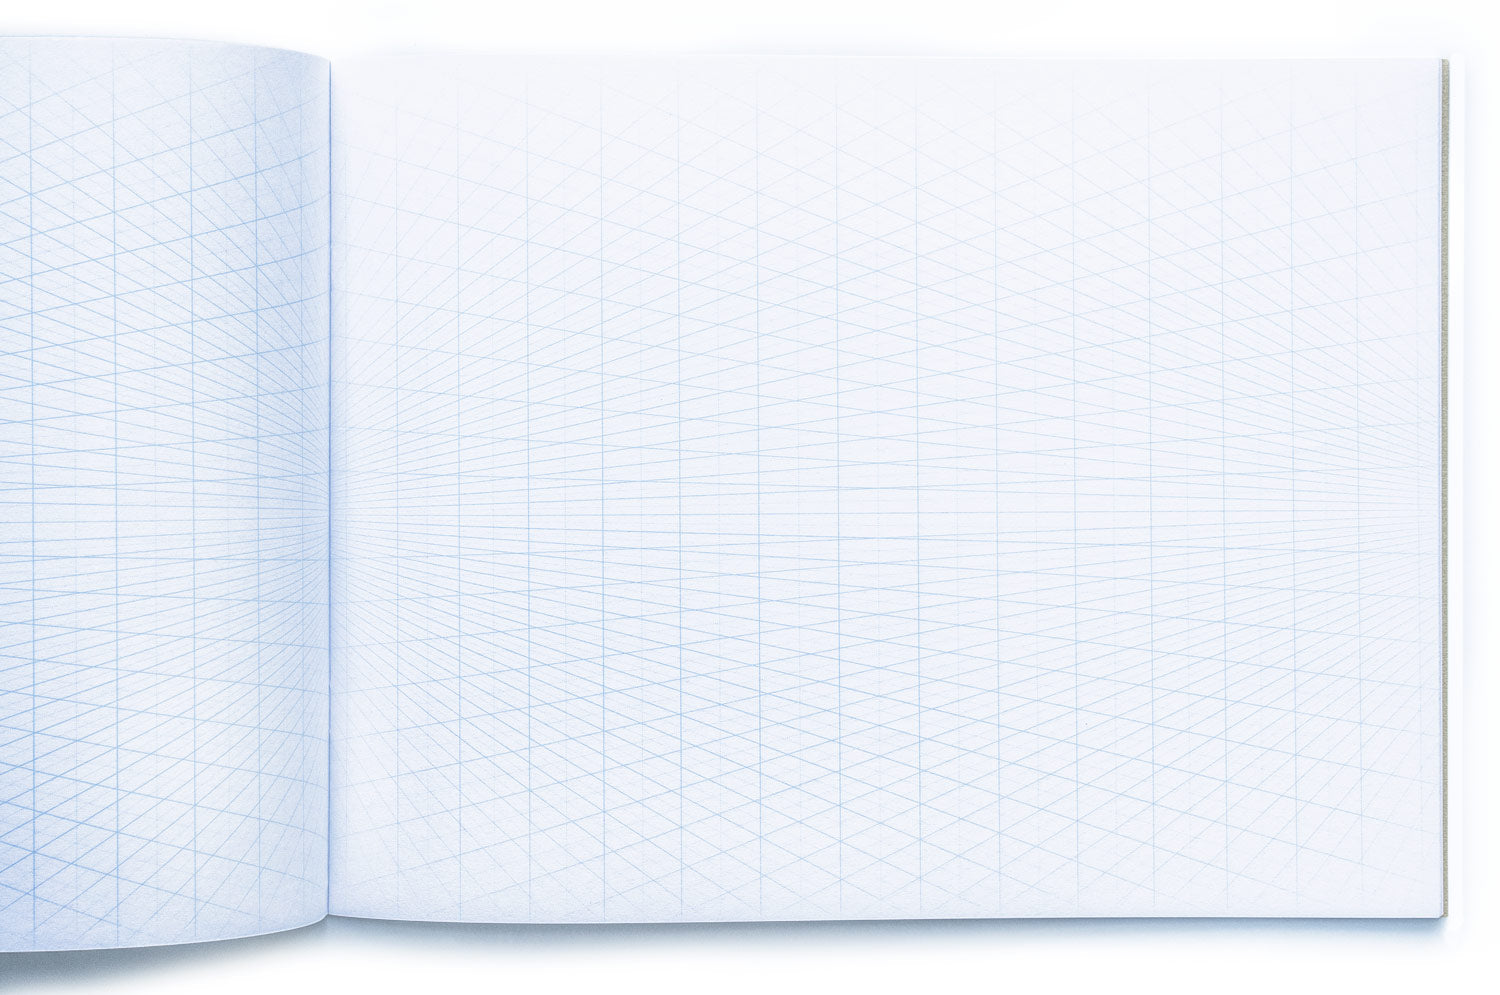 Koala Tools 2005951 11 x 17 in. 2-Point Perspective Grid Sketch Pad